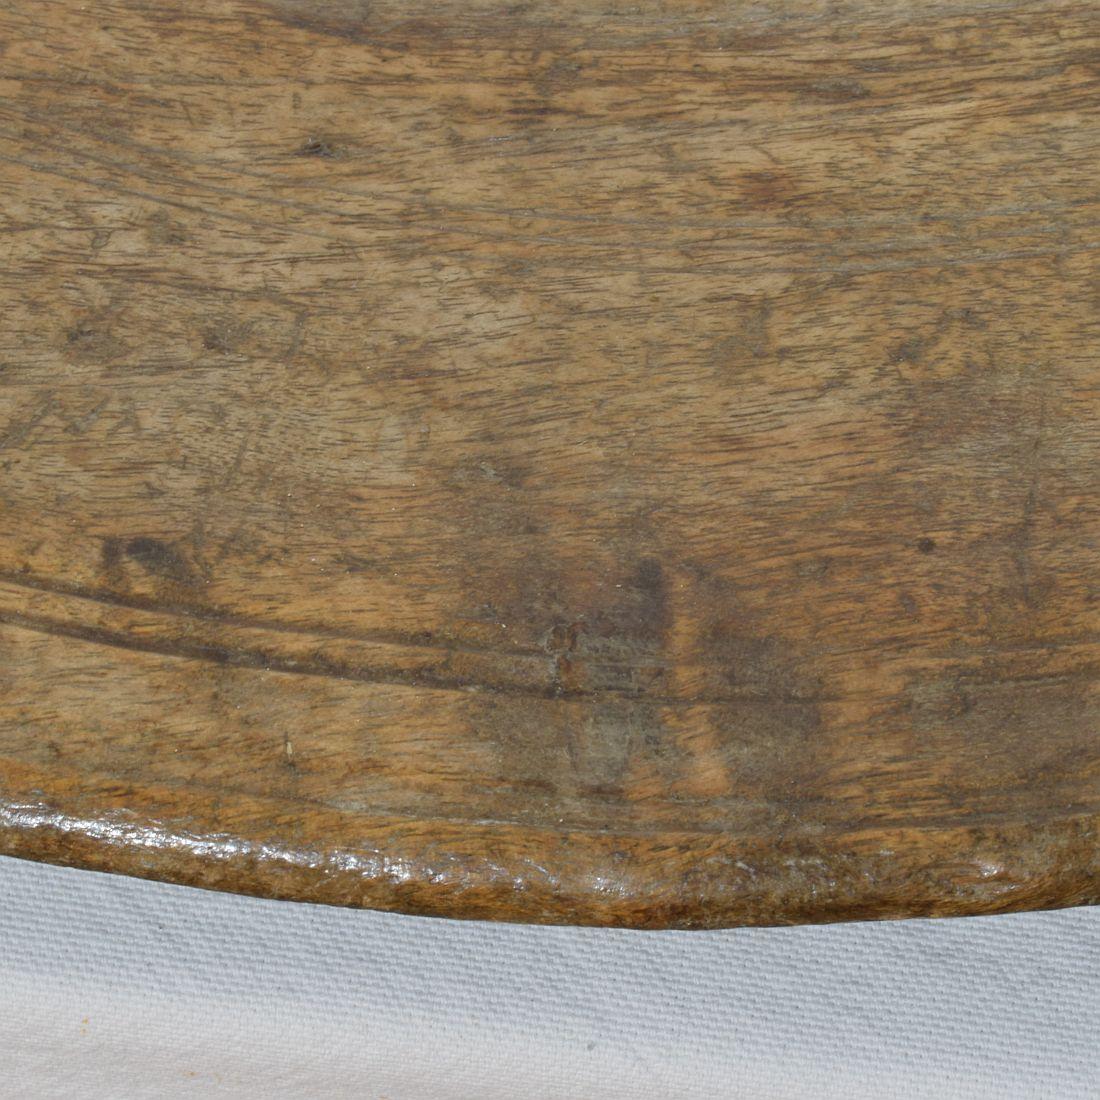 Large 18th Century French Wooden Bowl / Platter For Sale 14